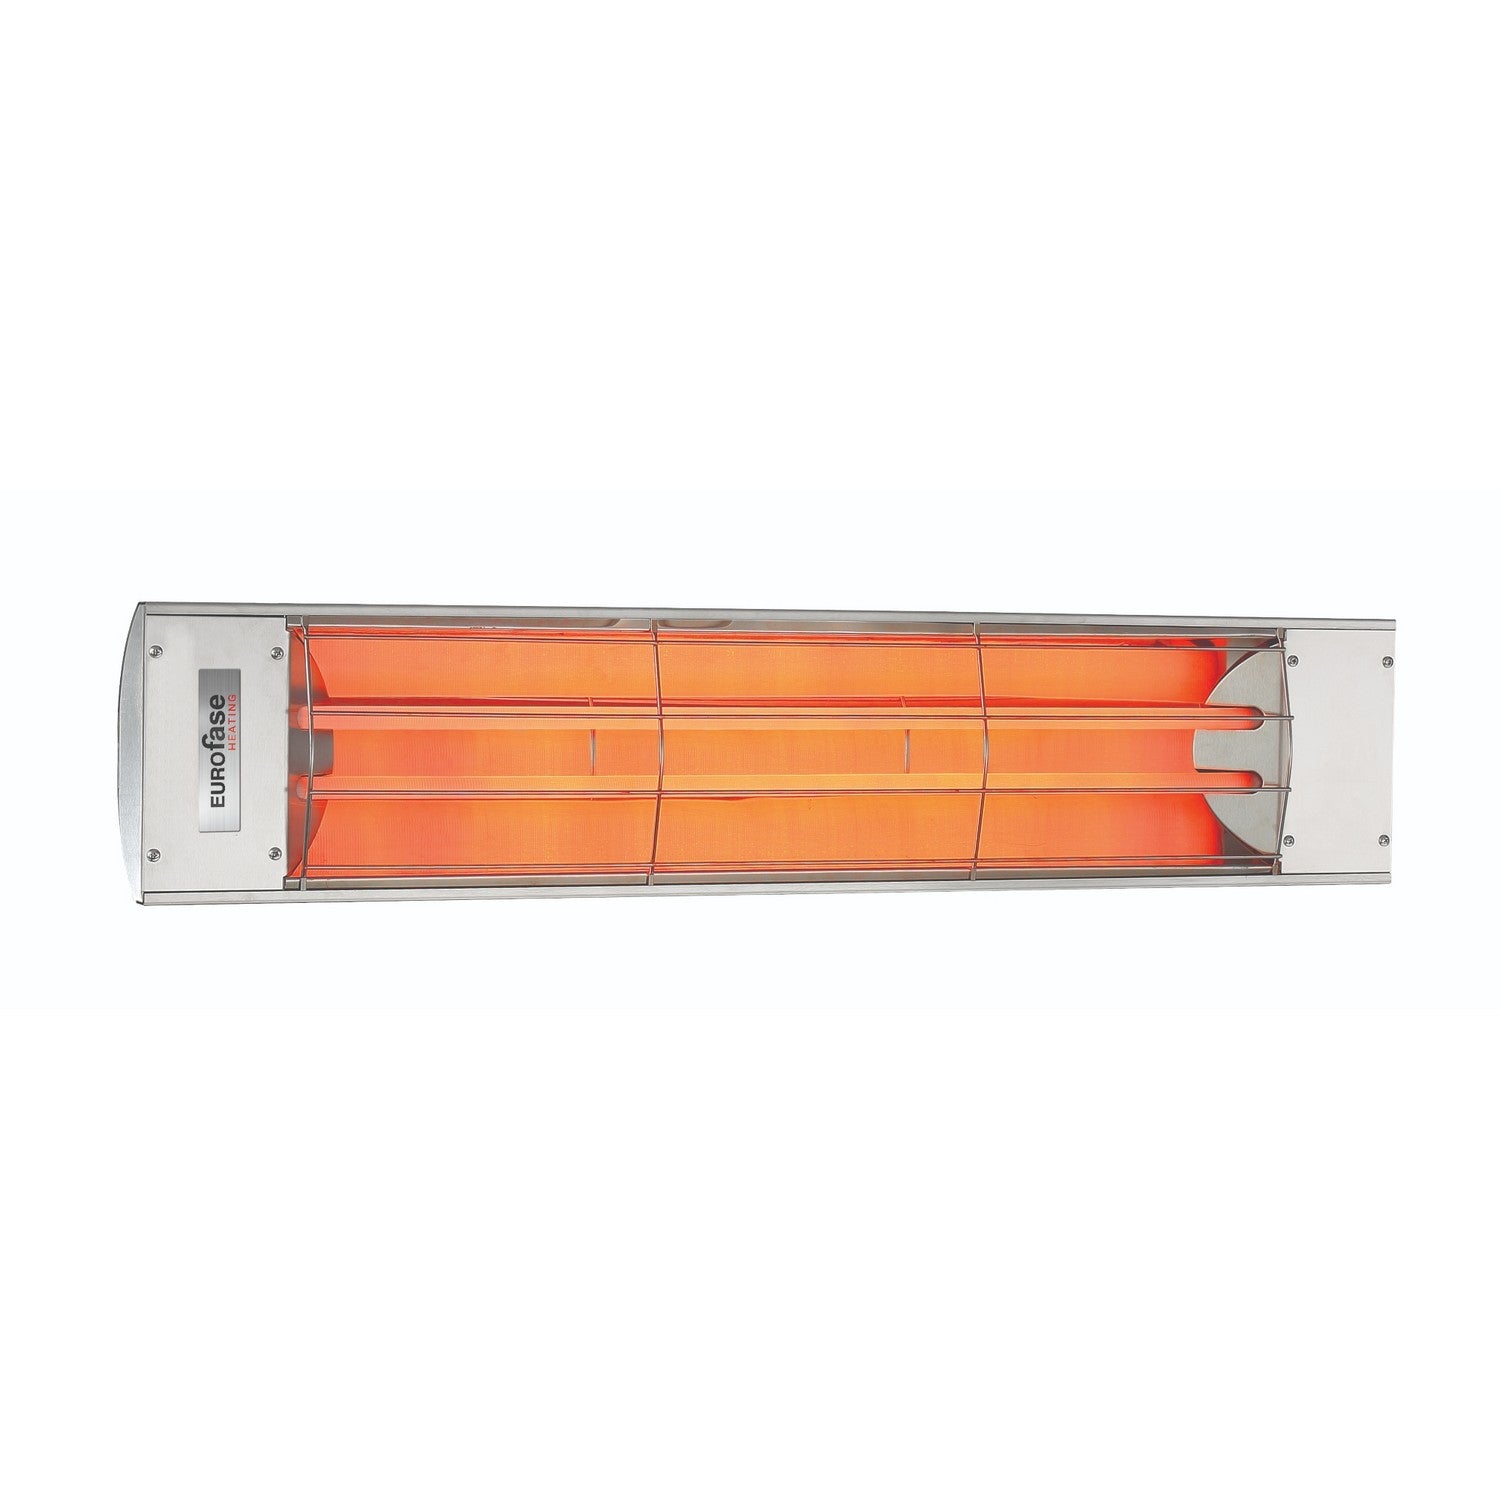 Eurofase - EF40480S - Electric Heater - Stainless Steel